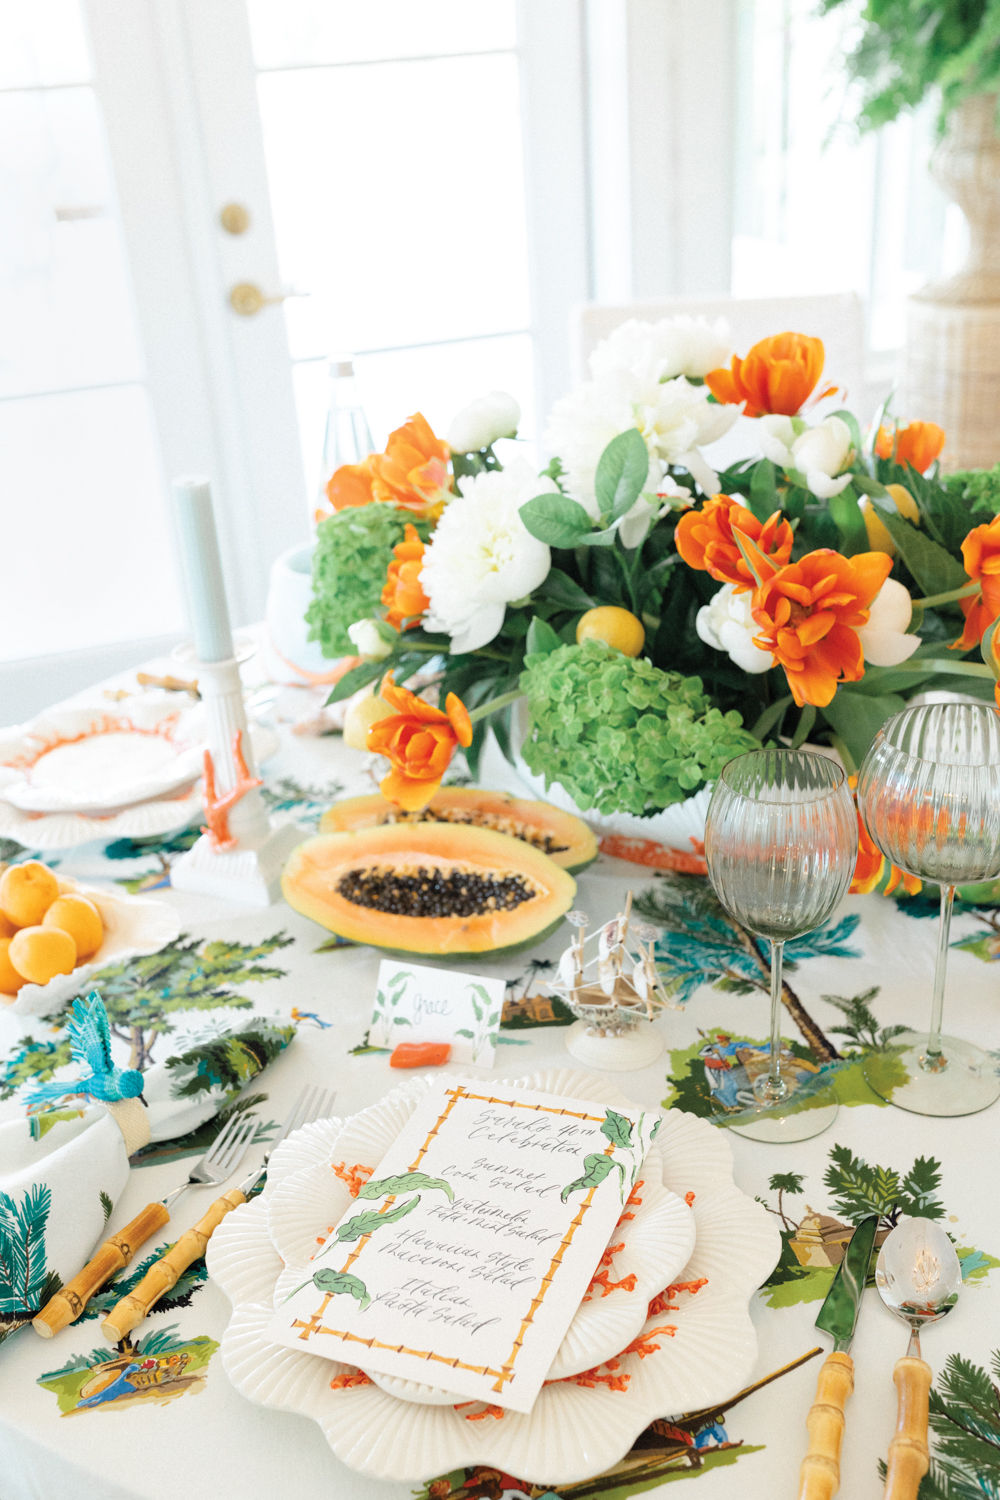 Styled tabletop place settings with bamboo-handled utensils and a white, green and orange floral arrangement next to papaya halves.